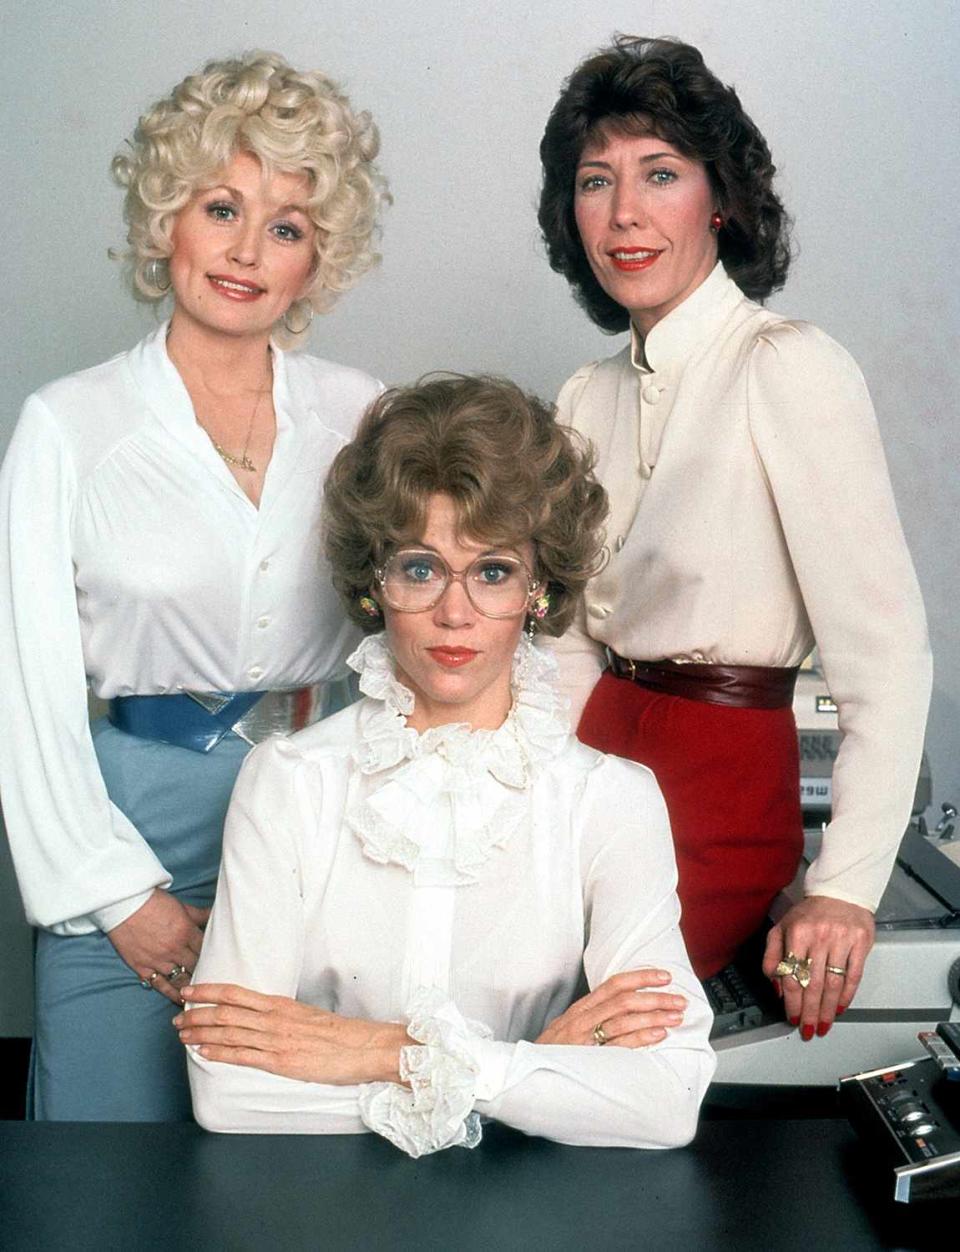 <p>The ultimate A-list threesome, Dolly Parton, Lily Tomlin and Fonda, turn the tables on their awful boss in the 1980 film <em>Nine to Five</em>.</p>